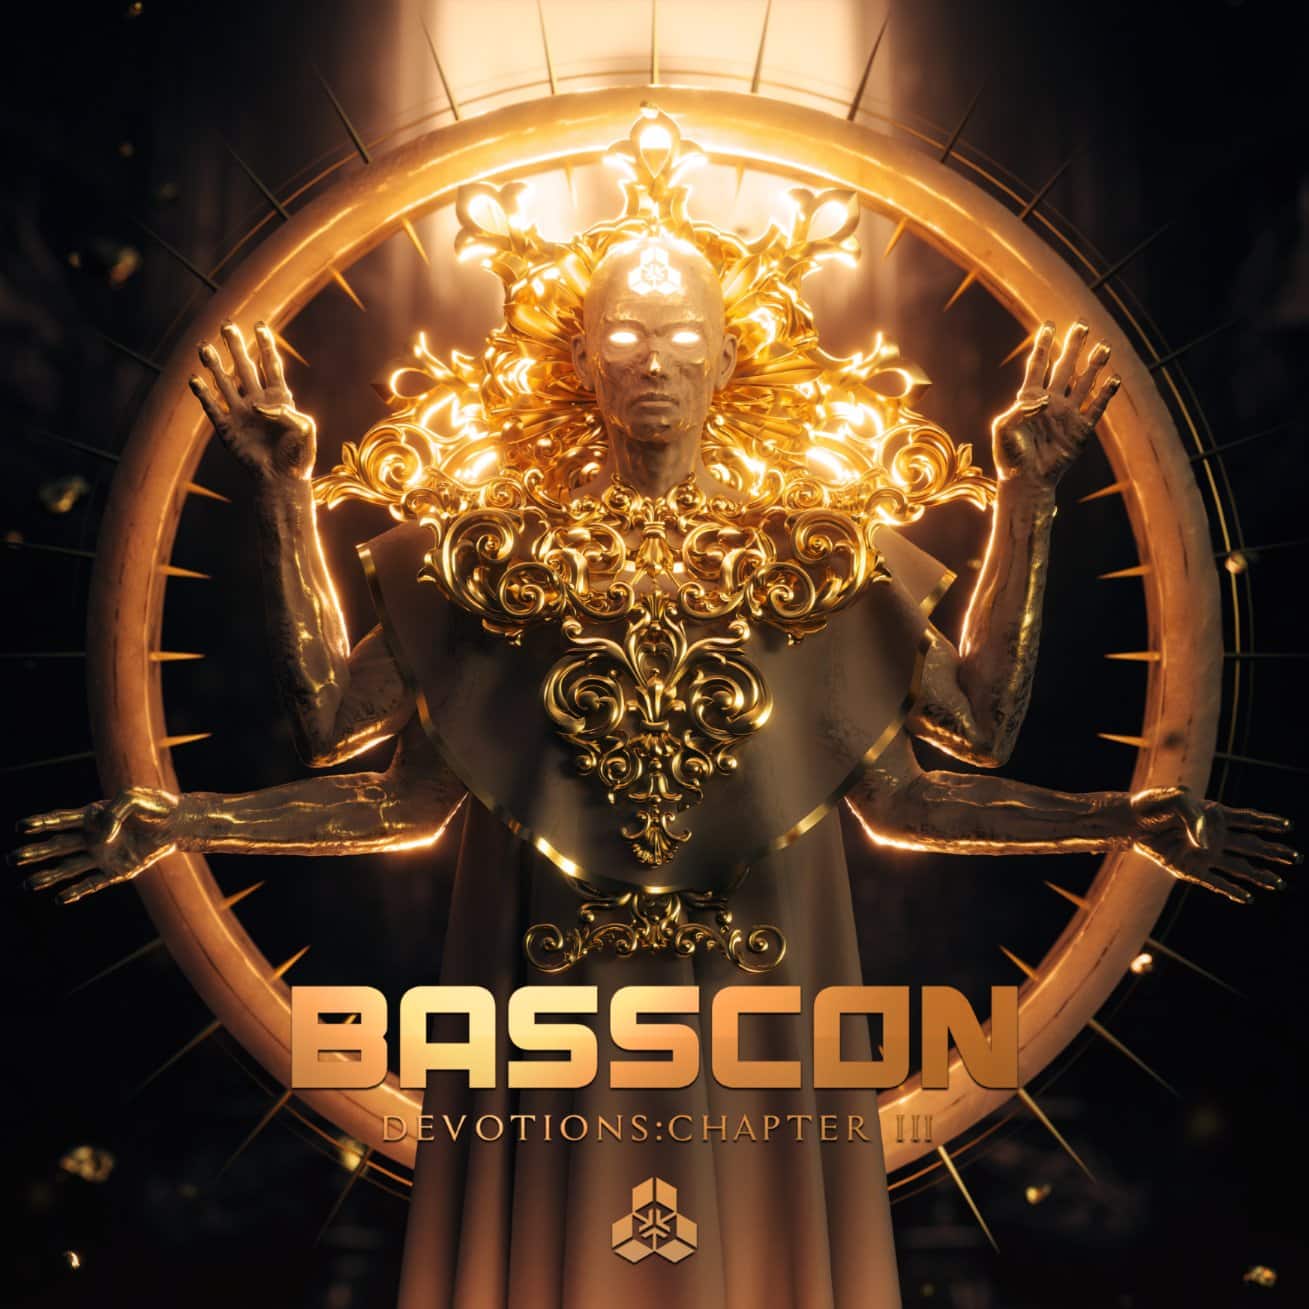 basscon records - devotions: chapter iii cover art